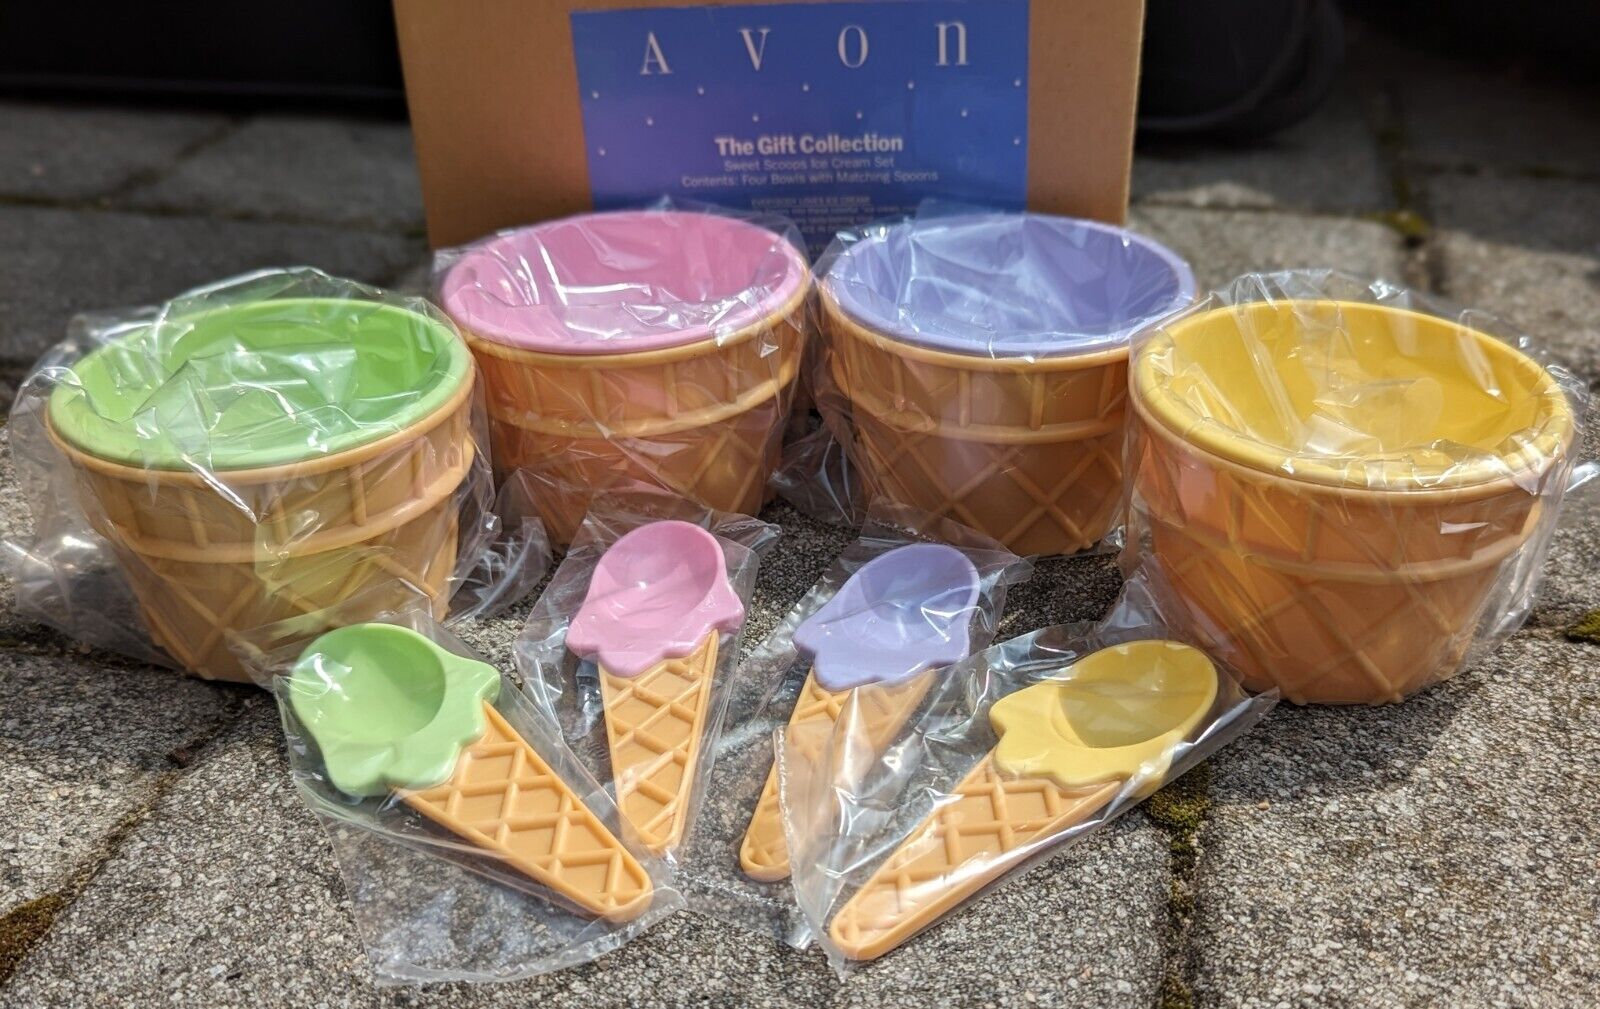 NEW Avon Gift Collection Sweet Scoops Ice Cream Set SEALED